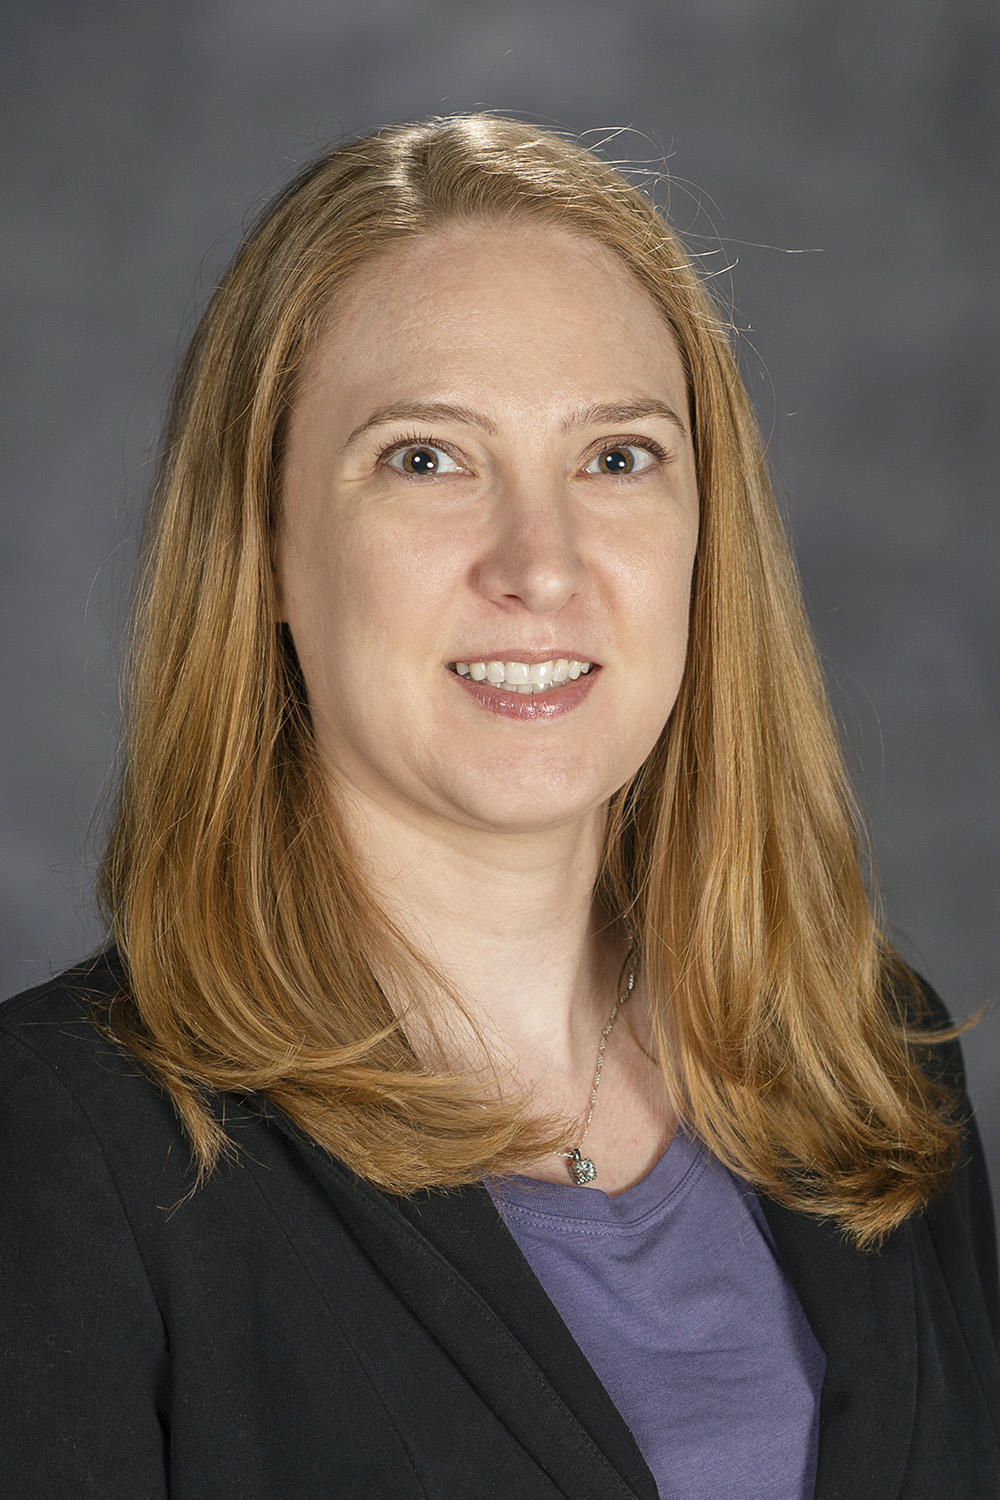 Emily Farris, Ph.D. Assistant Director for Educational Services and Research Initiatives